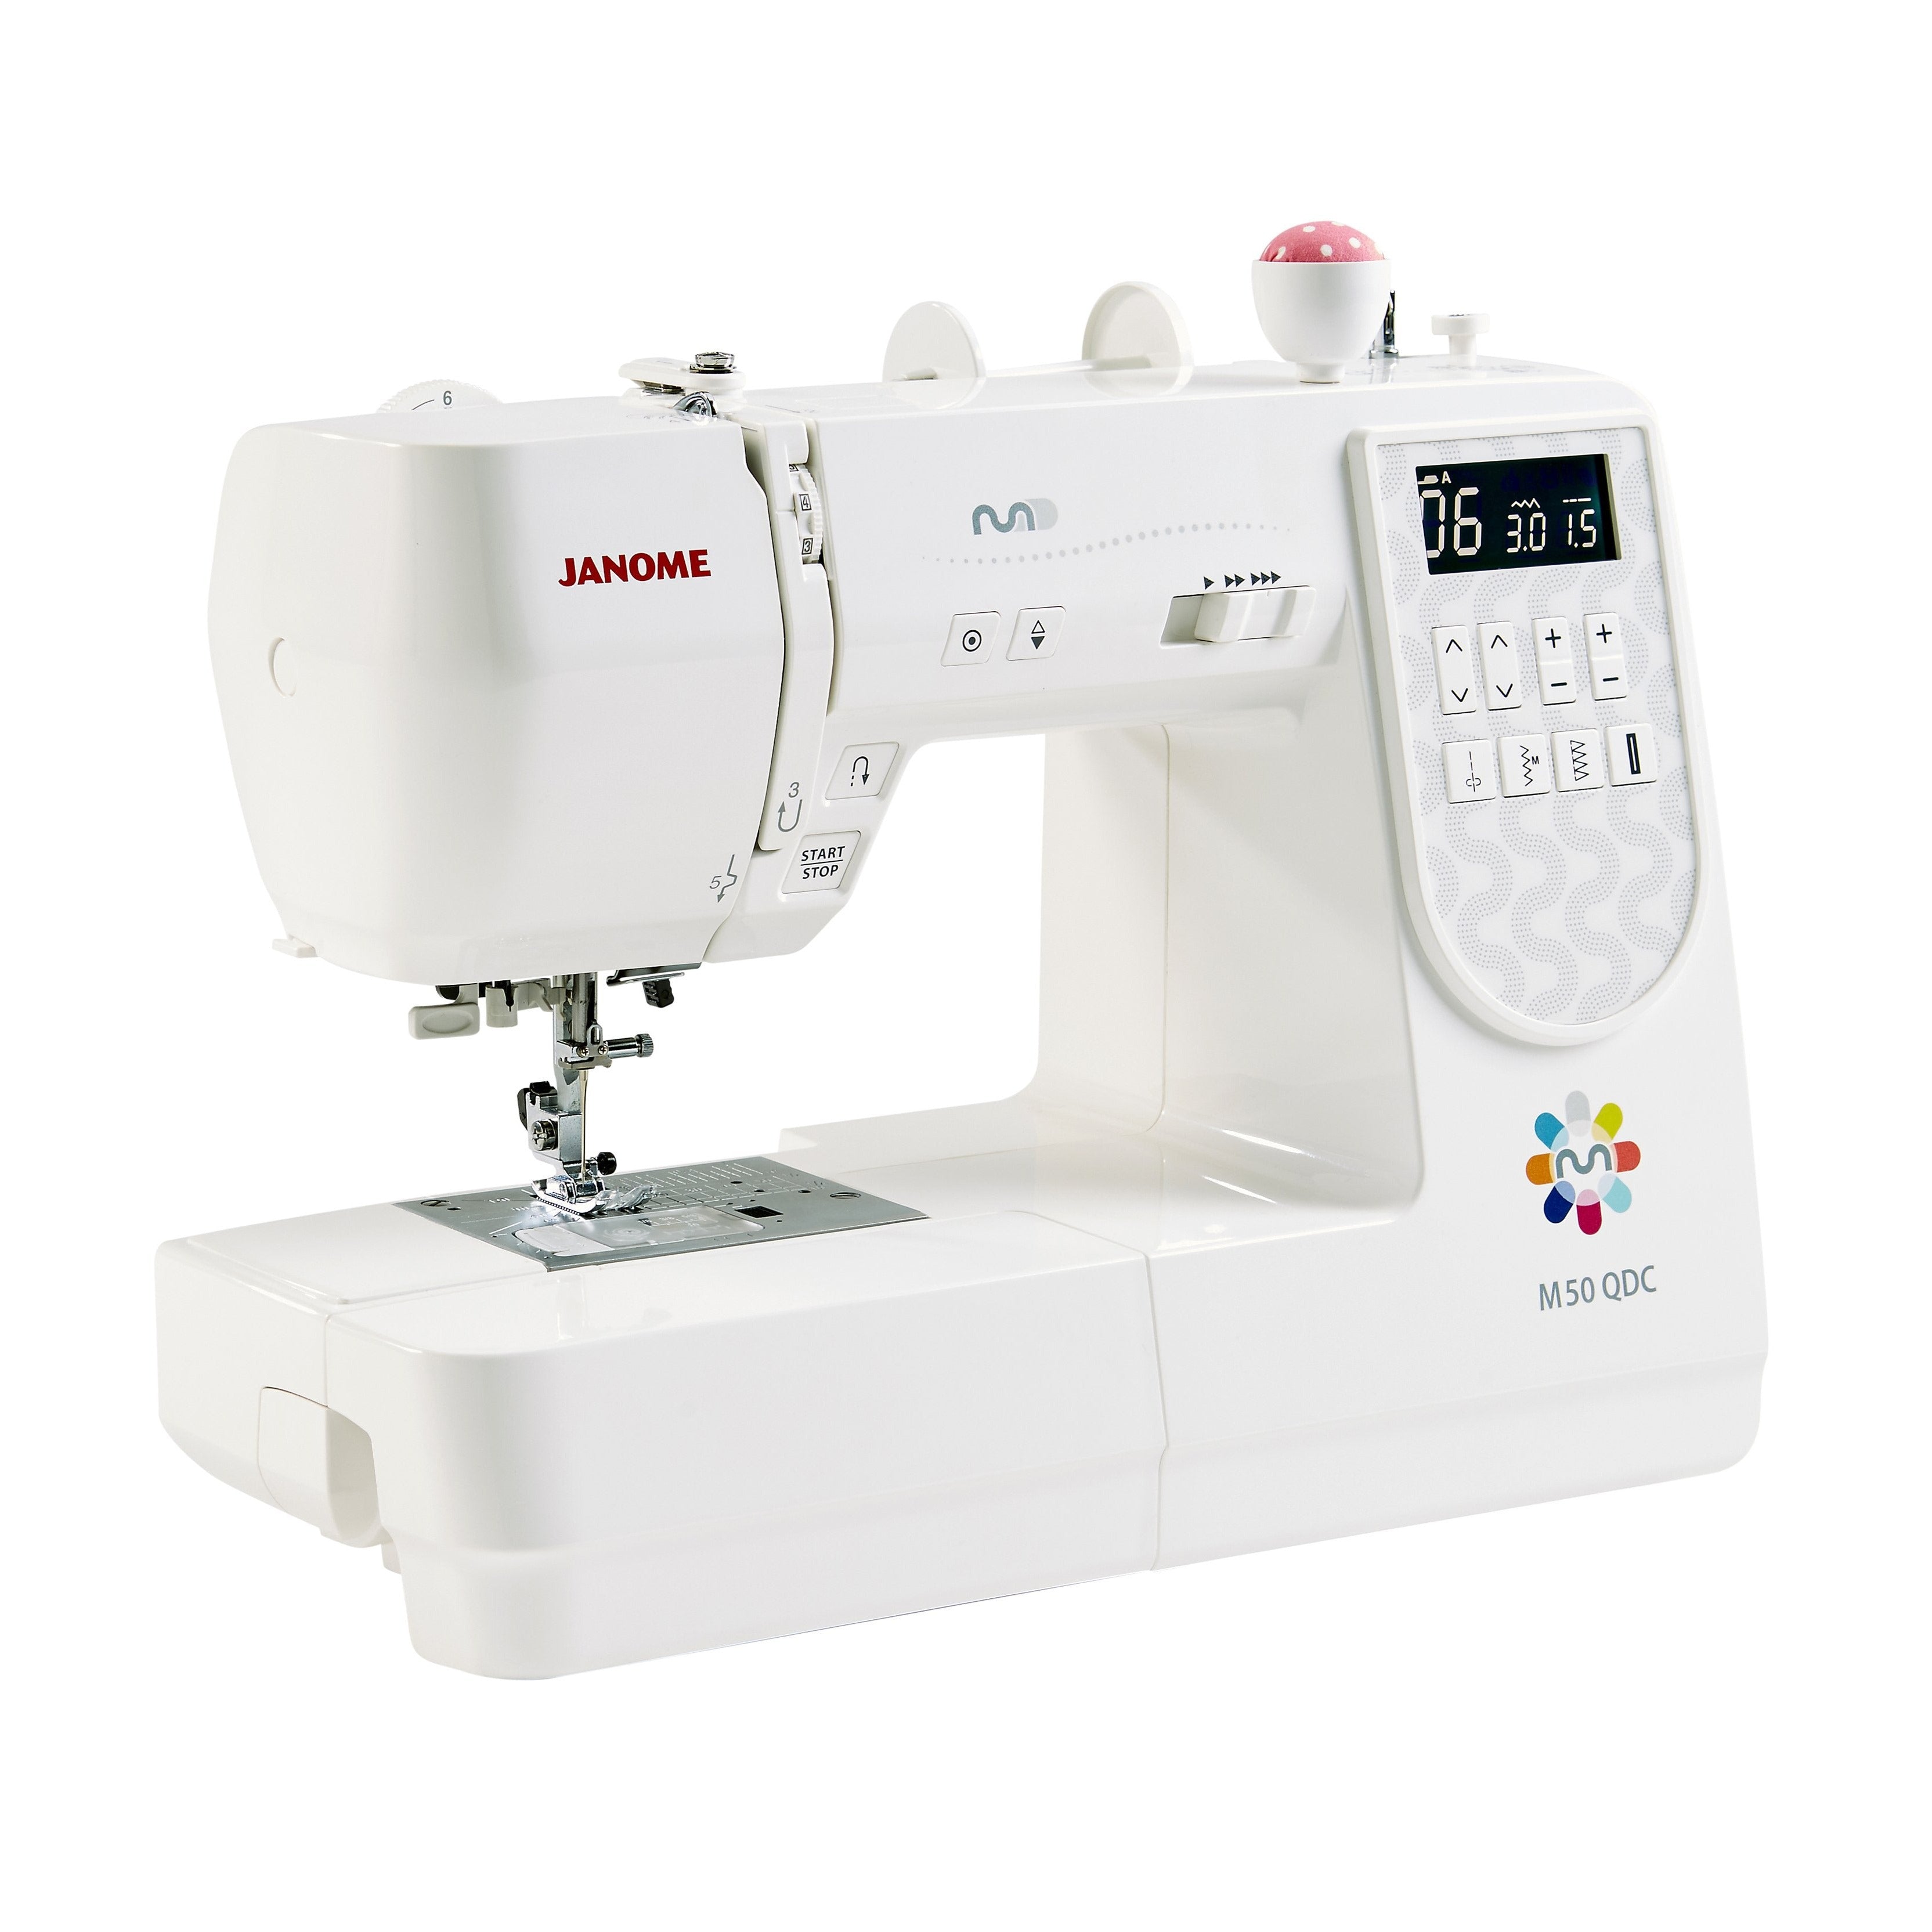 Janome Sewing Machine M50 QDC Save £50 from Jaycotts Sewing Supplies